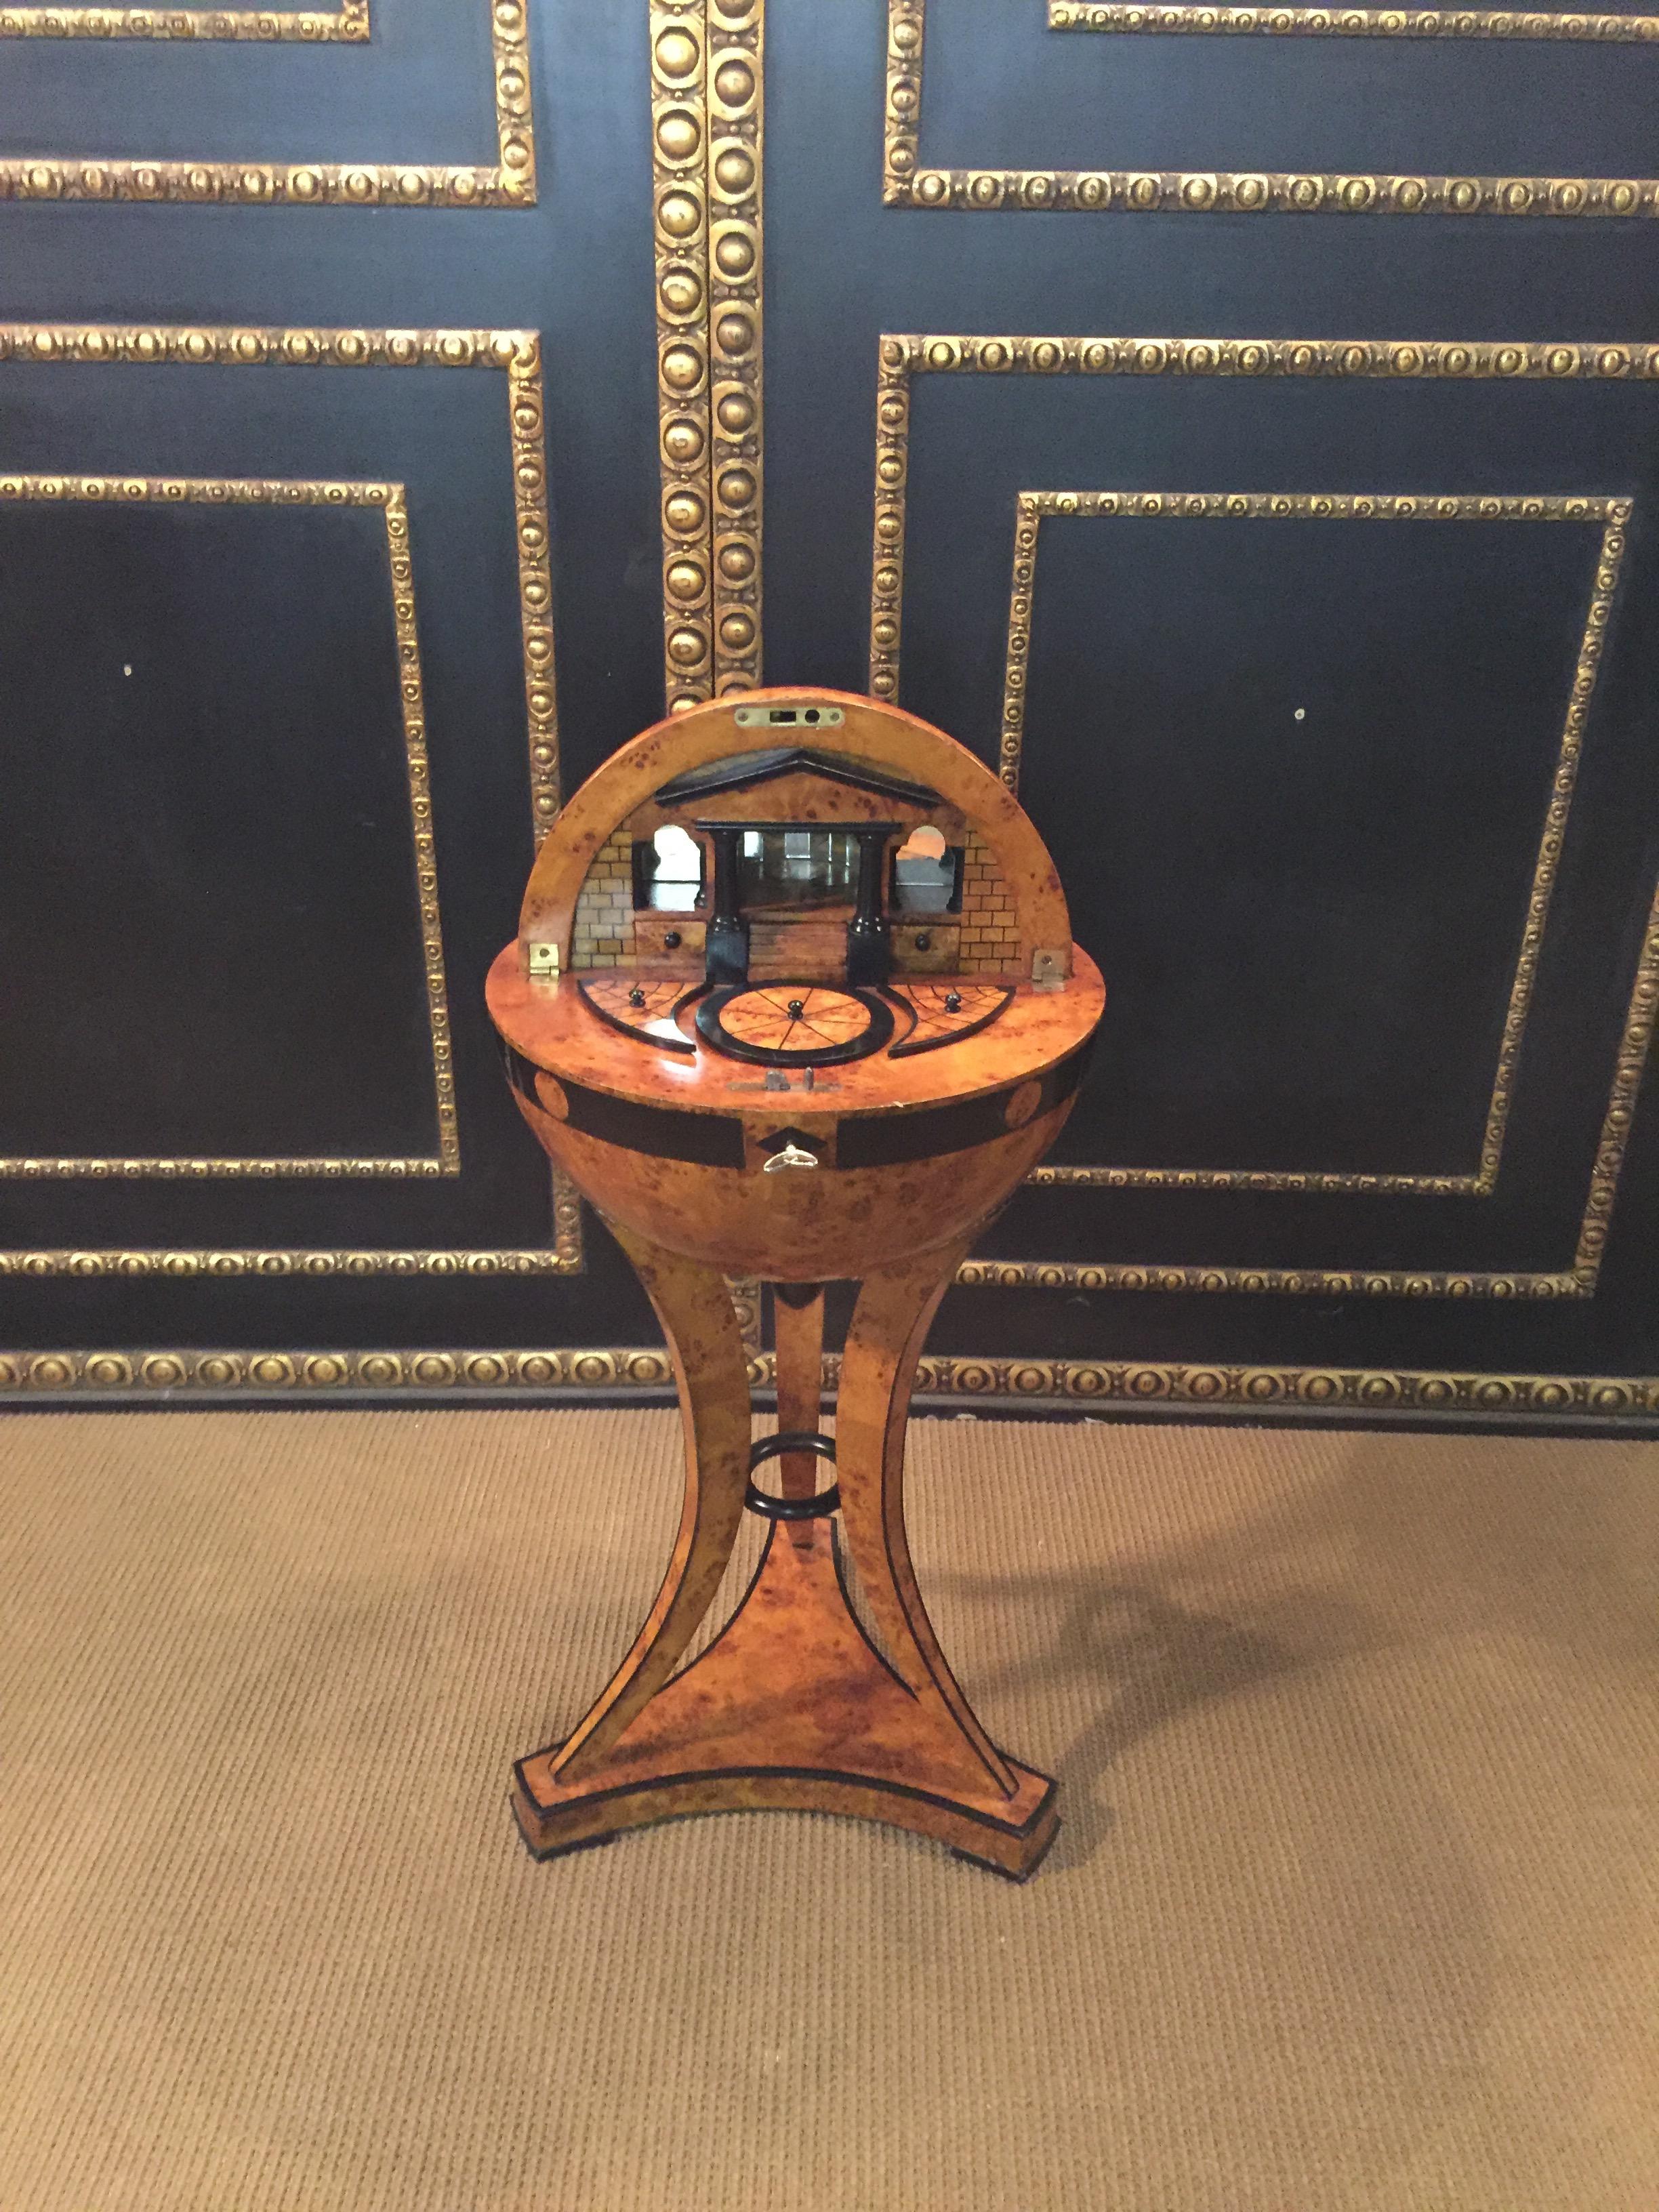 Highly significant globe sewing table in Vienna Biedermeier style. Bird’s-eye maple root veneer on solid beech, partially ebonized, with inlays.